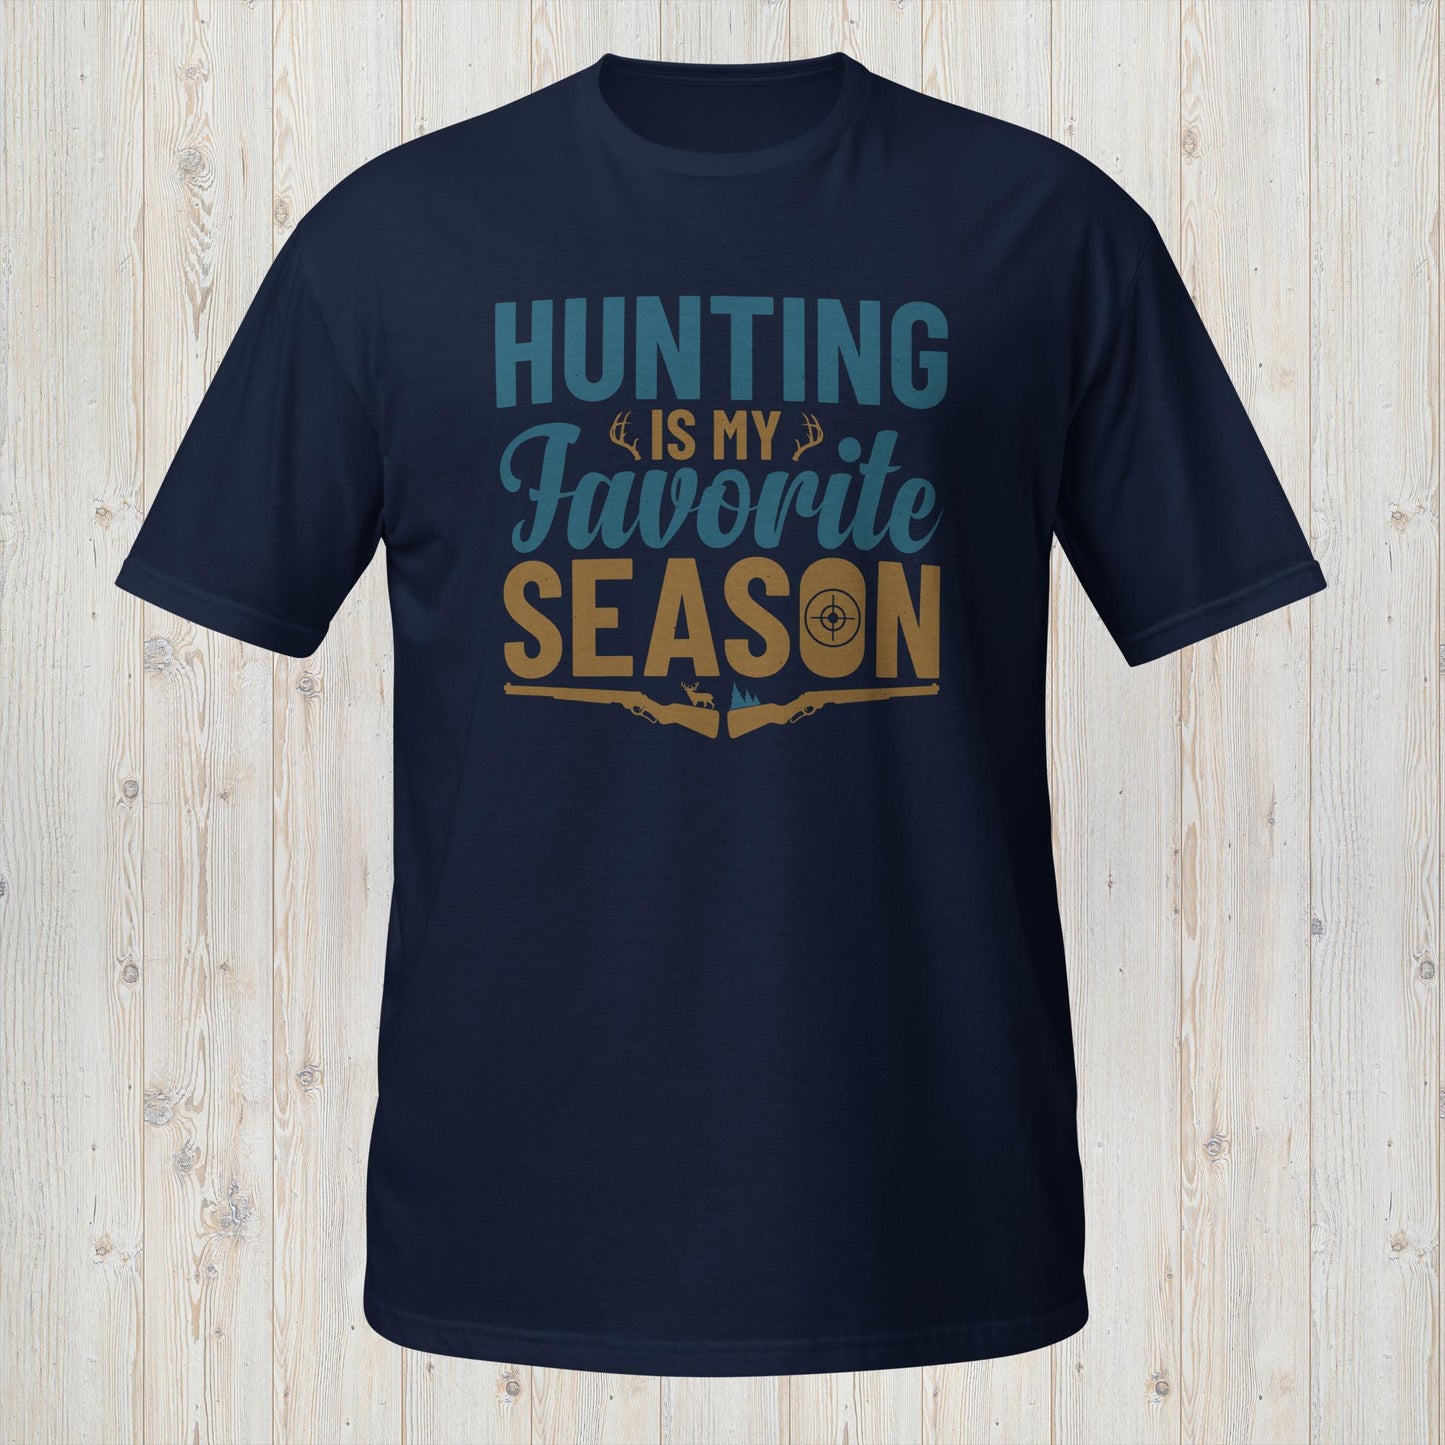 Hunting Season Enthusiast Tee - Nature's Best Time of Year